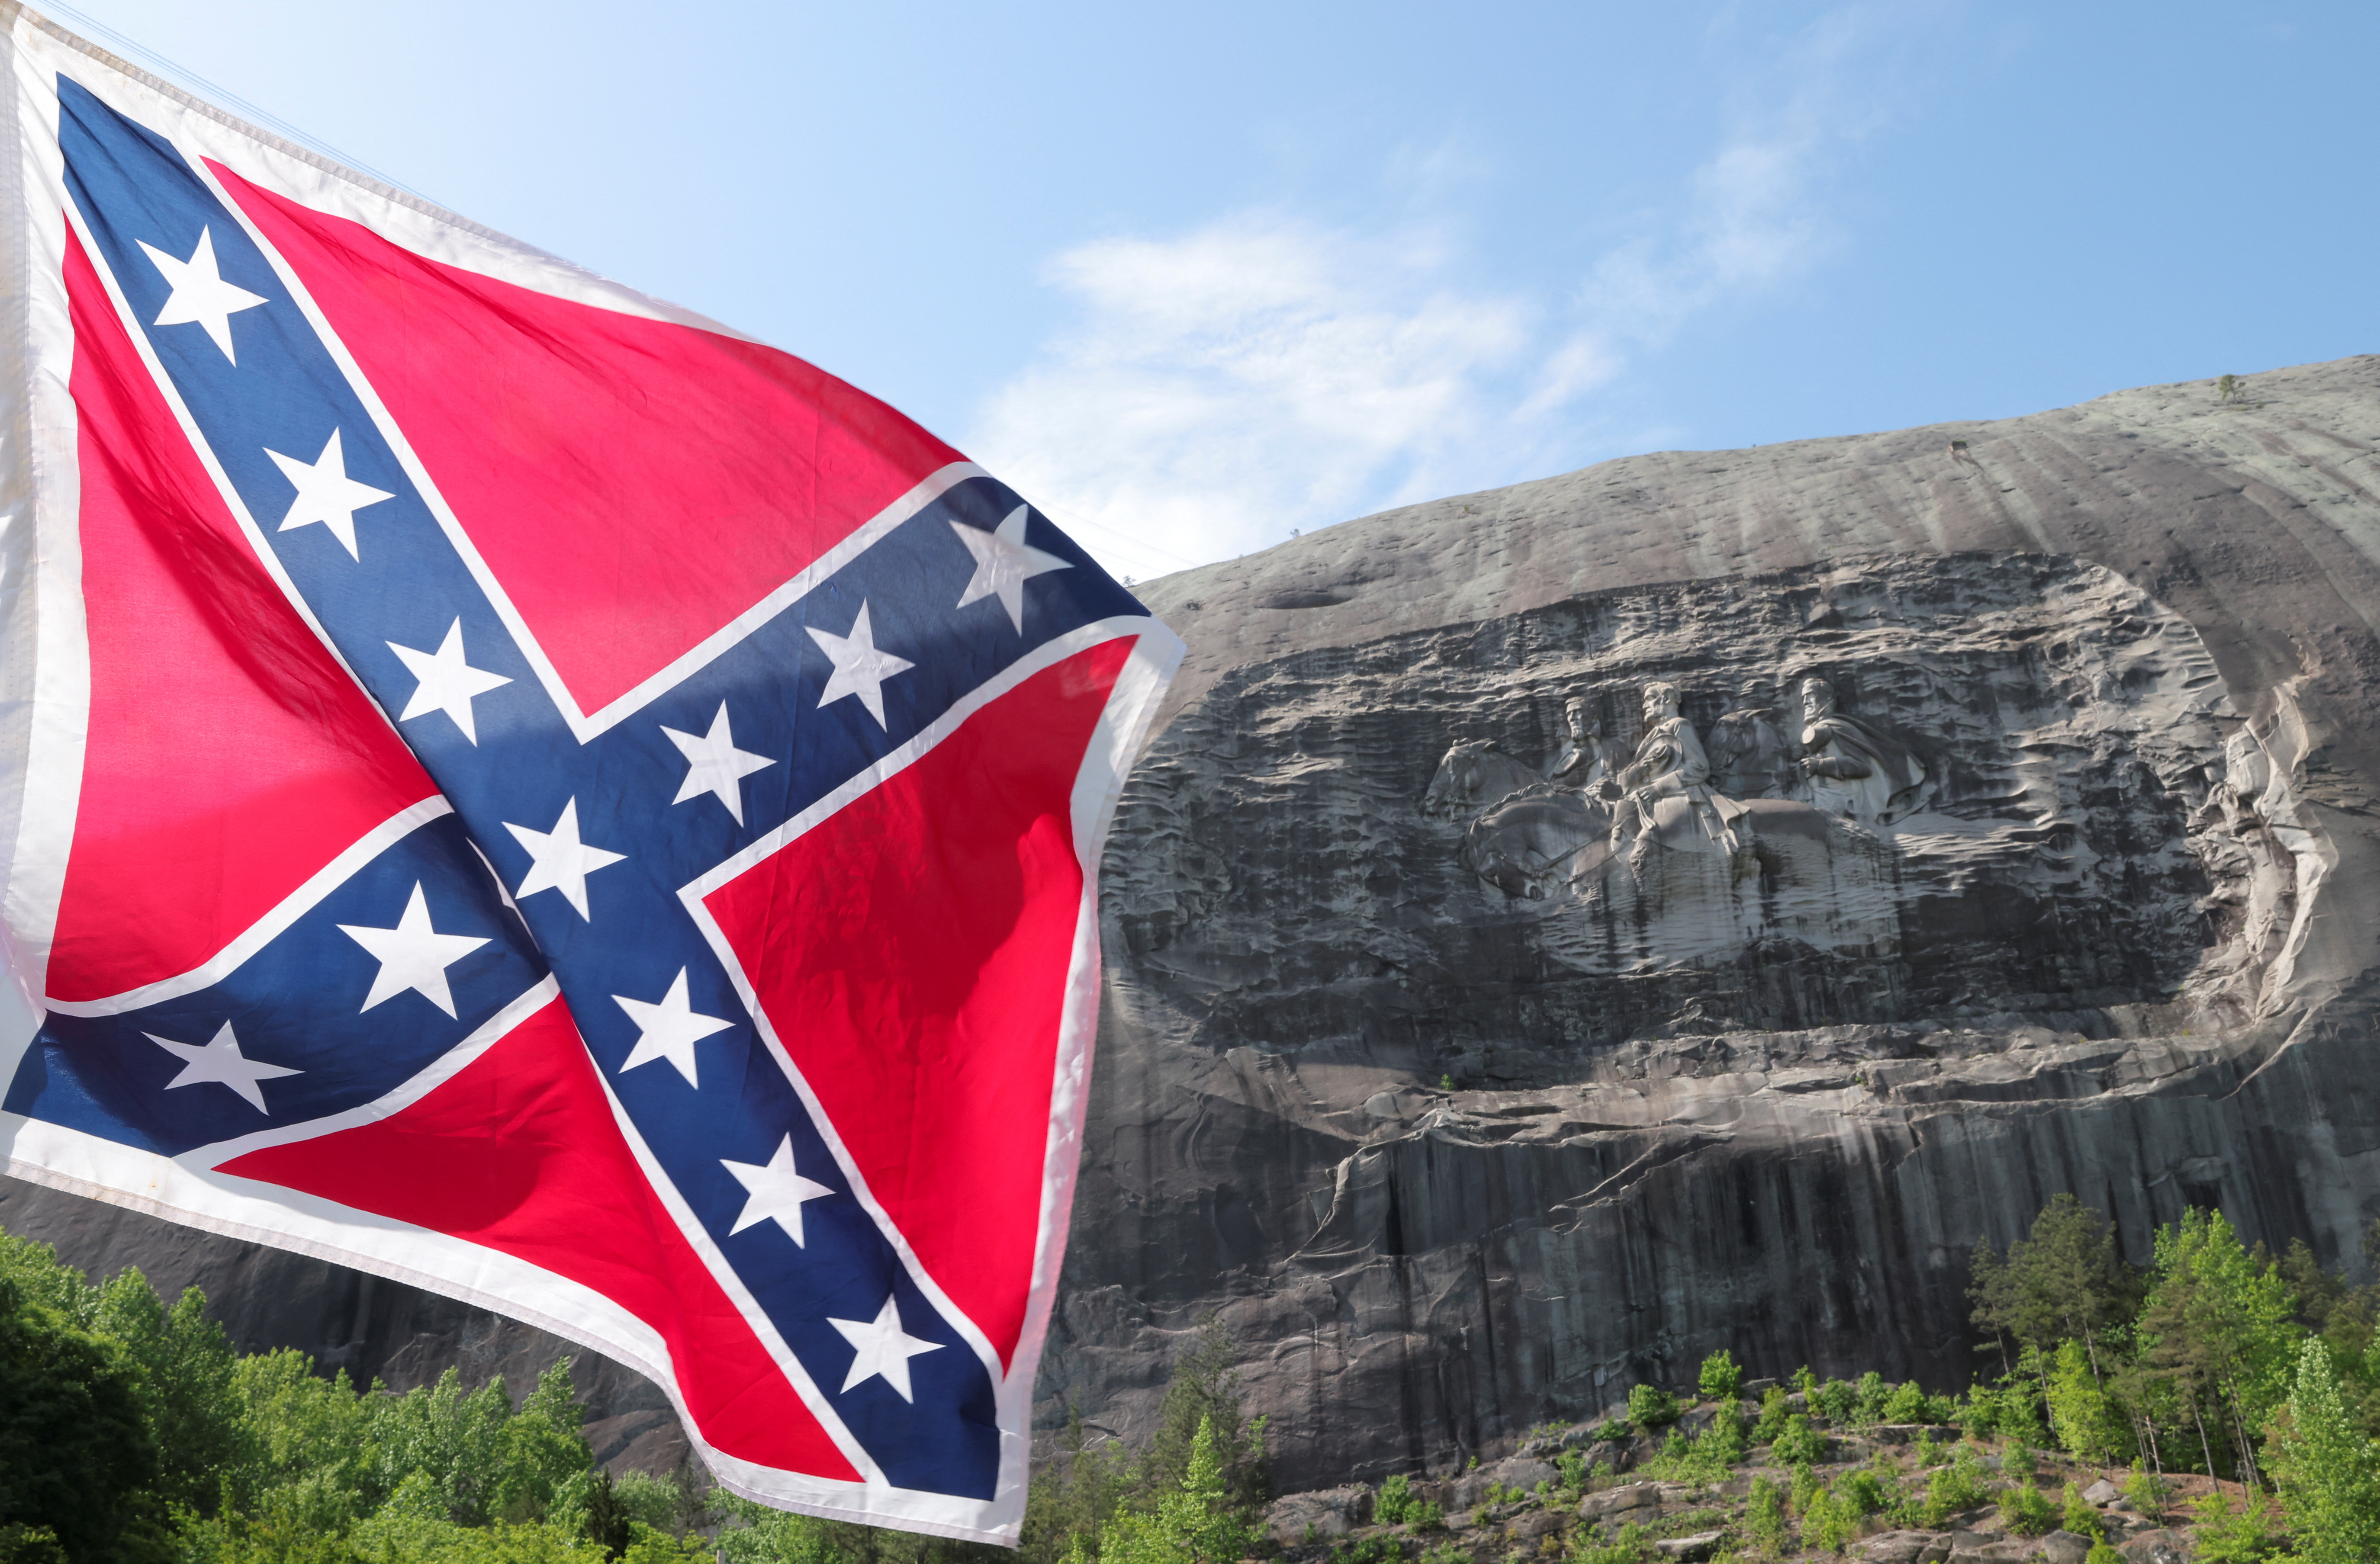 Confederate Memorial Day at Stone Mountain Park